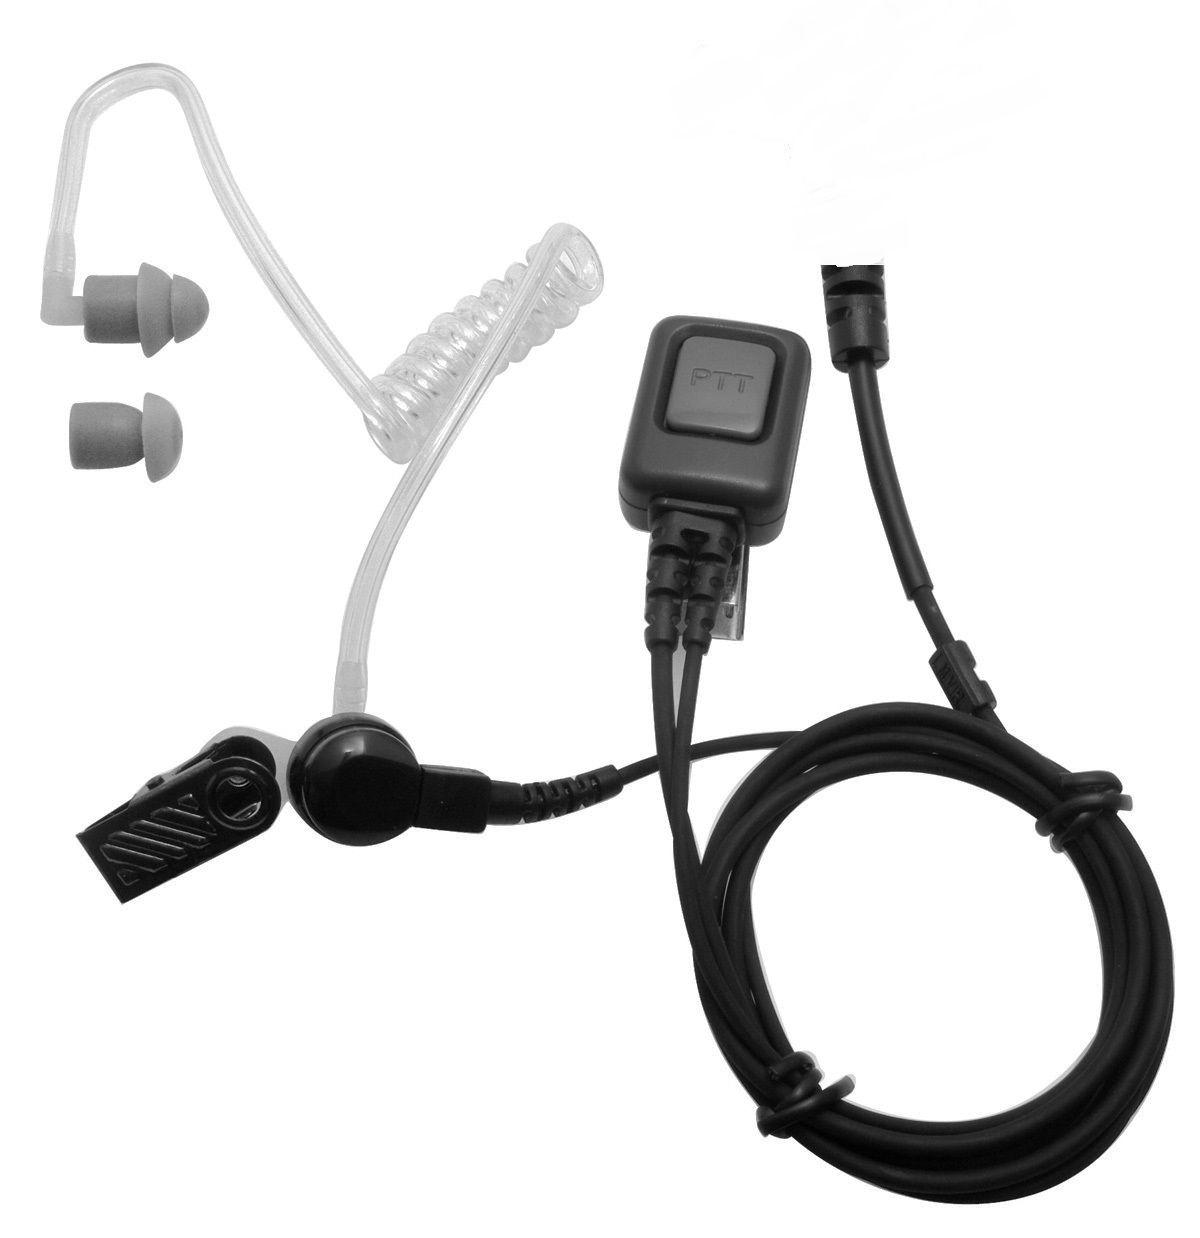 Curly tube earpiece with inline mic and PTT